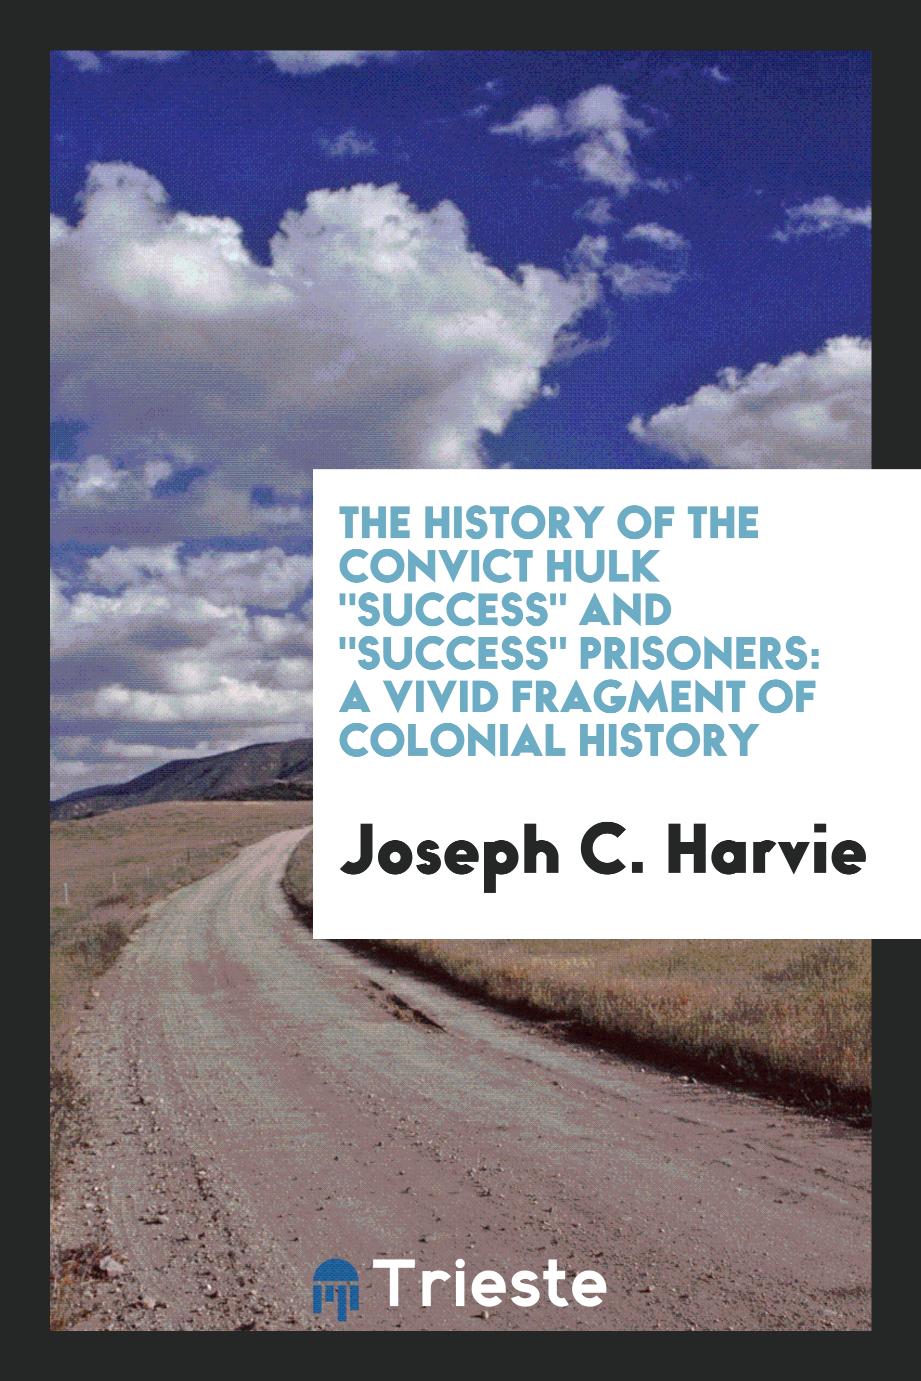 The History of the Convict Hulk "Success" and "Success" Prisoners: A Vivid Fragment of Colonial History